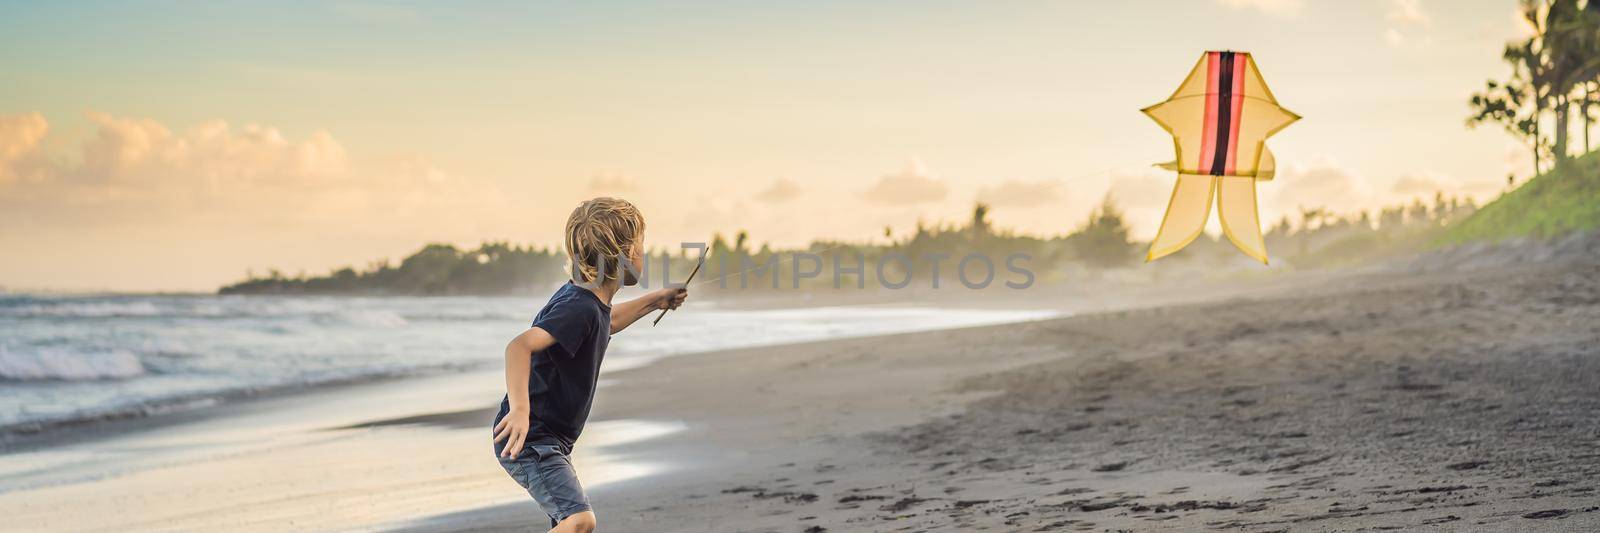 Happy young boy flying kite on the beach at sunset BANNER, LONG FORMAT by galitskaya